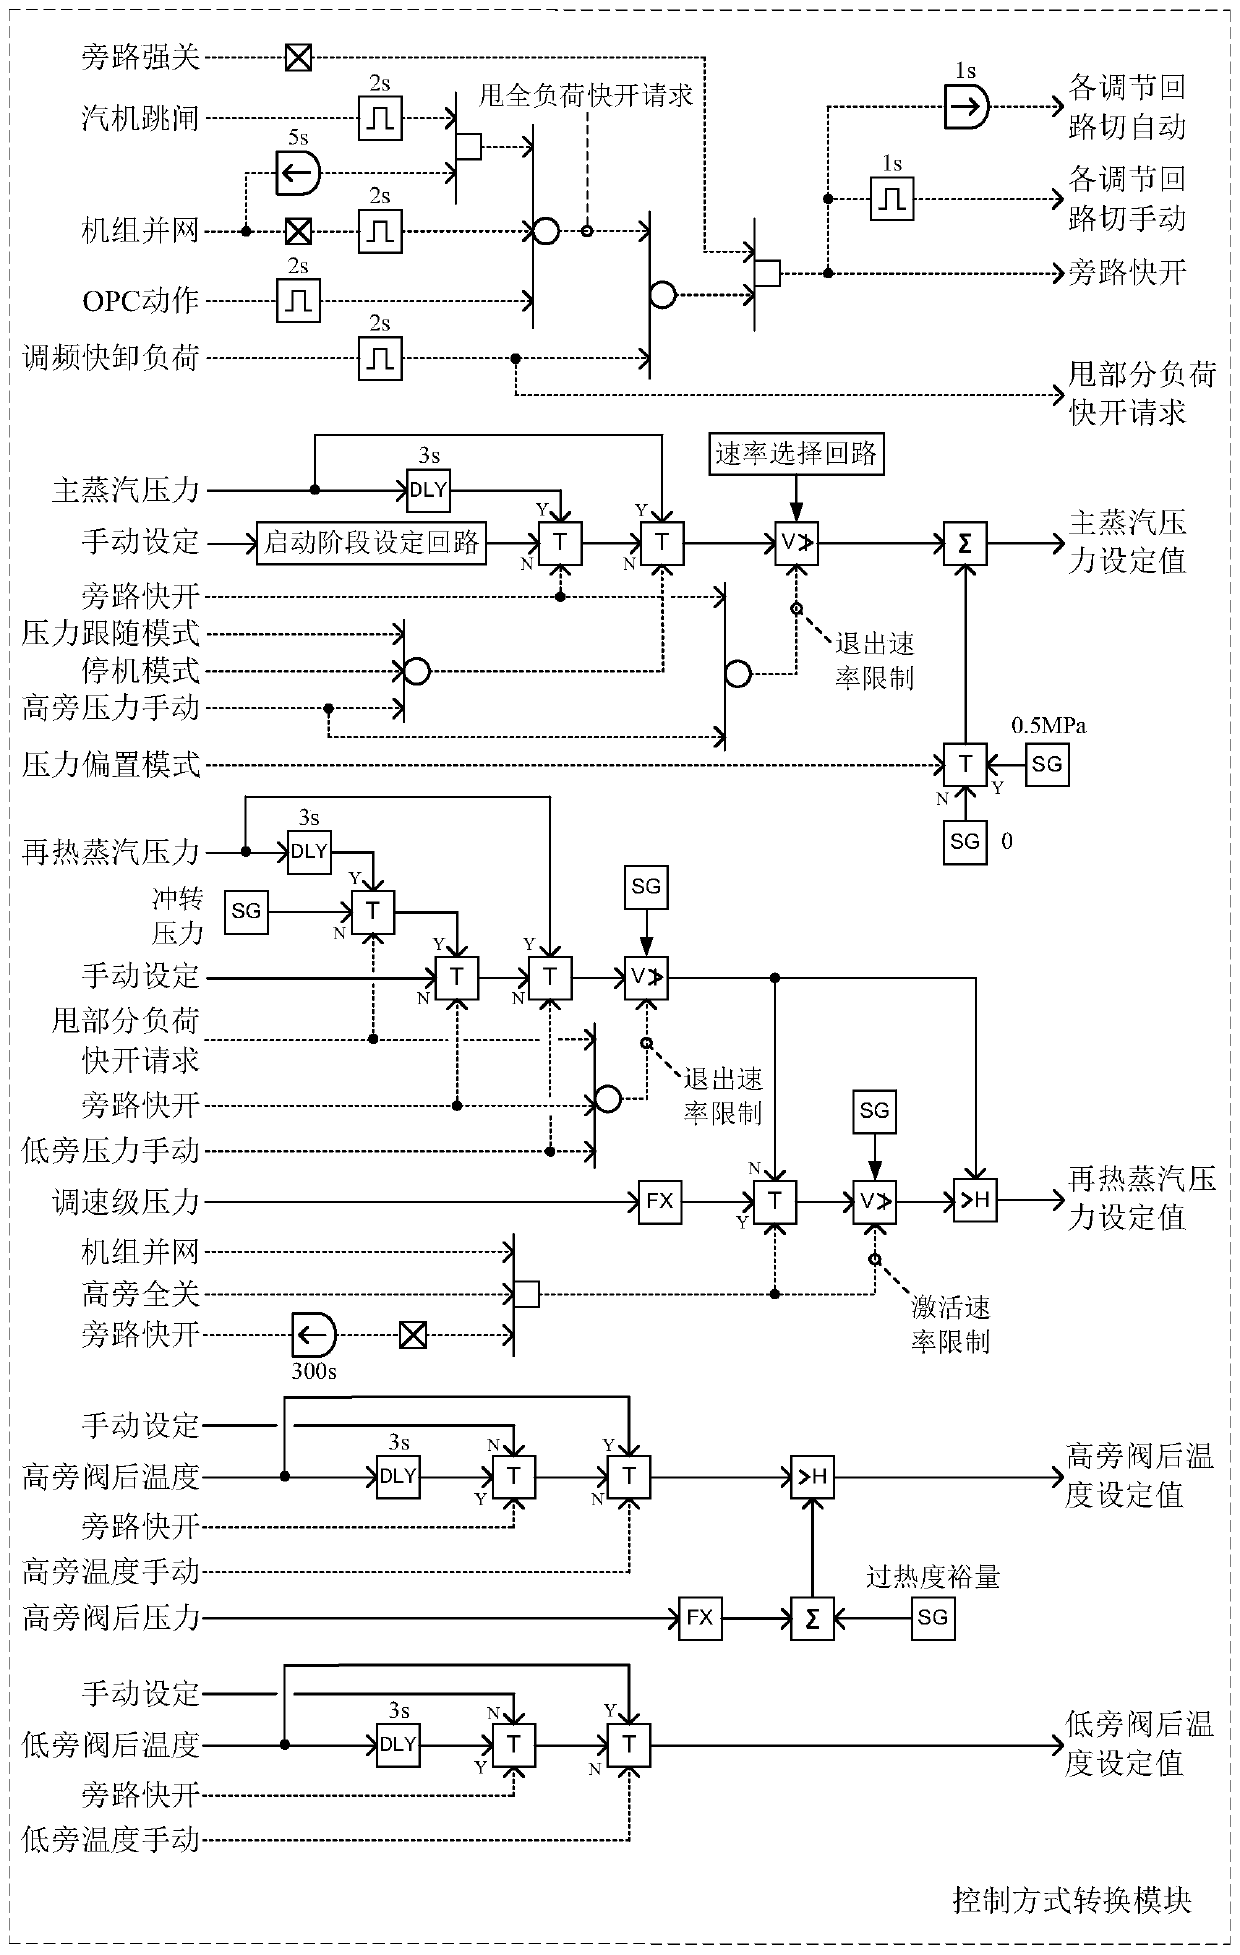 Load shedding control strategy of bypass system of thermal power generating unit in isolated network mode